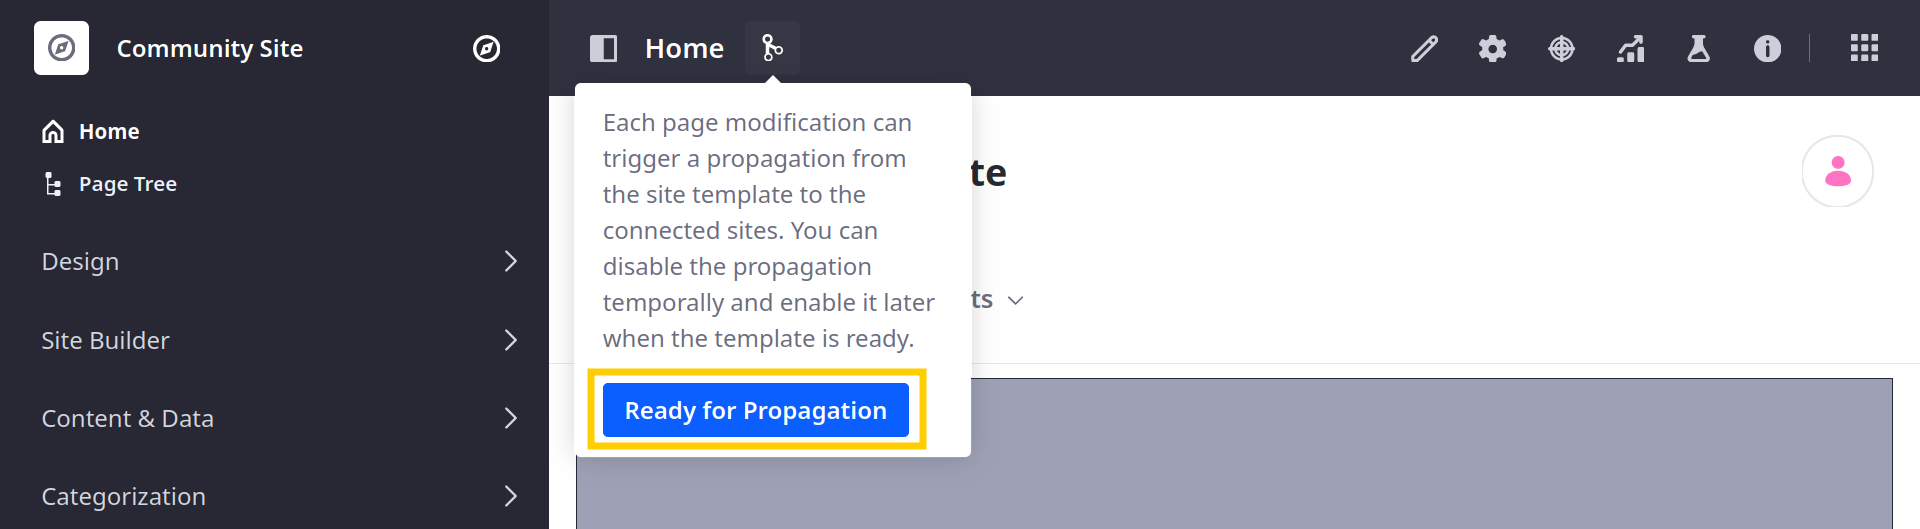 If Propagation is disabled, click Ready for Propagation.